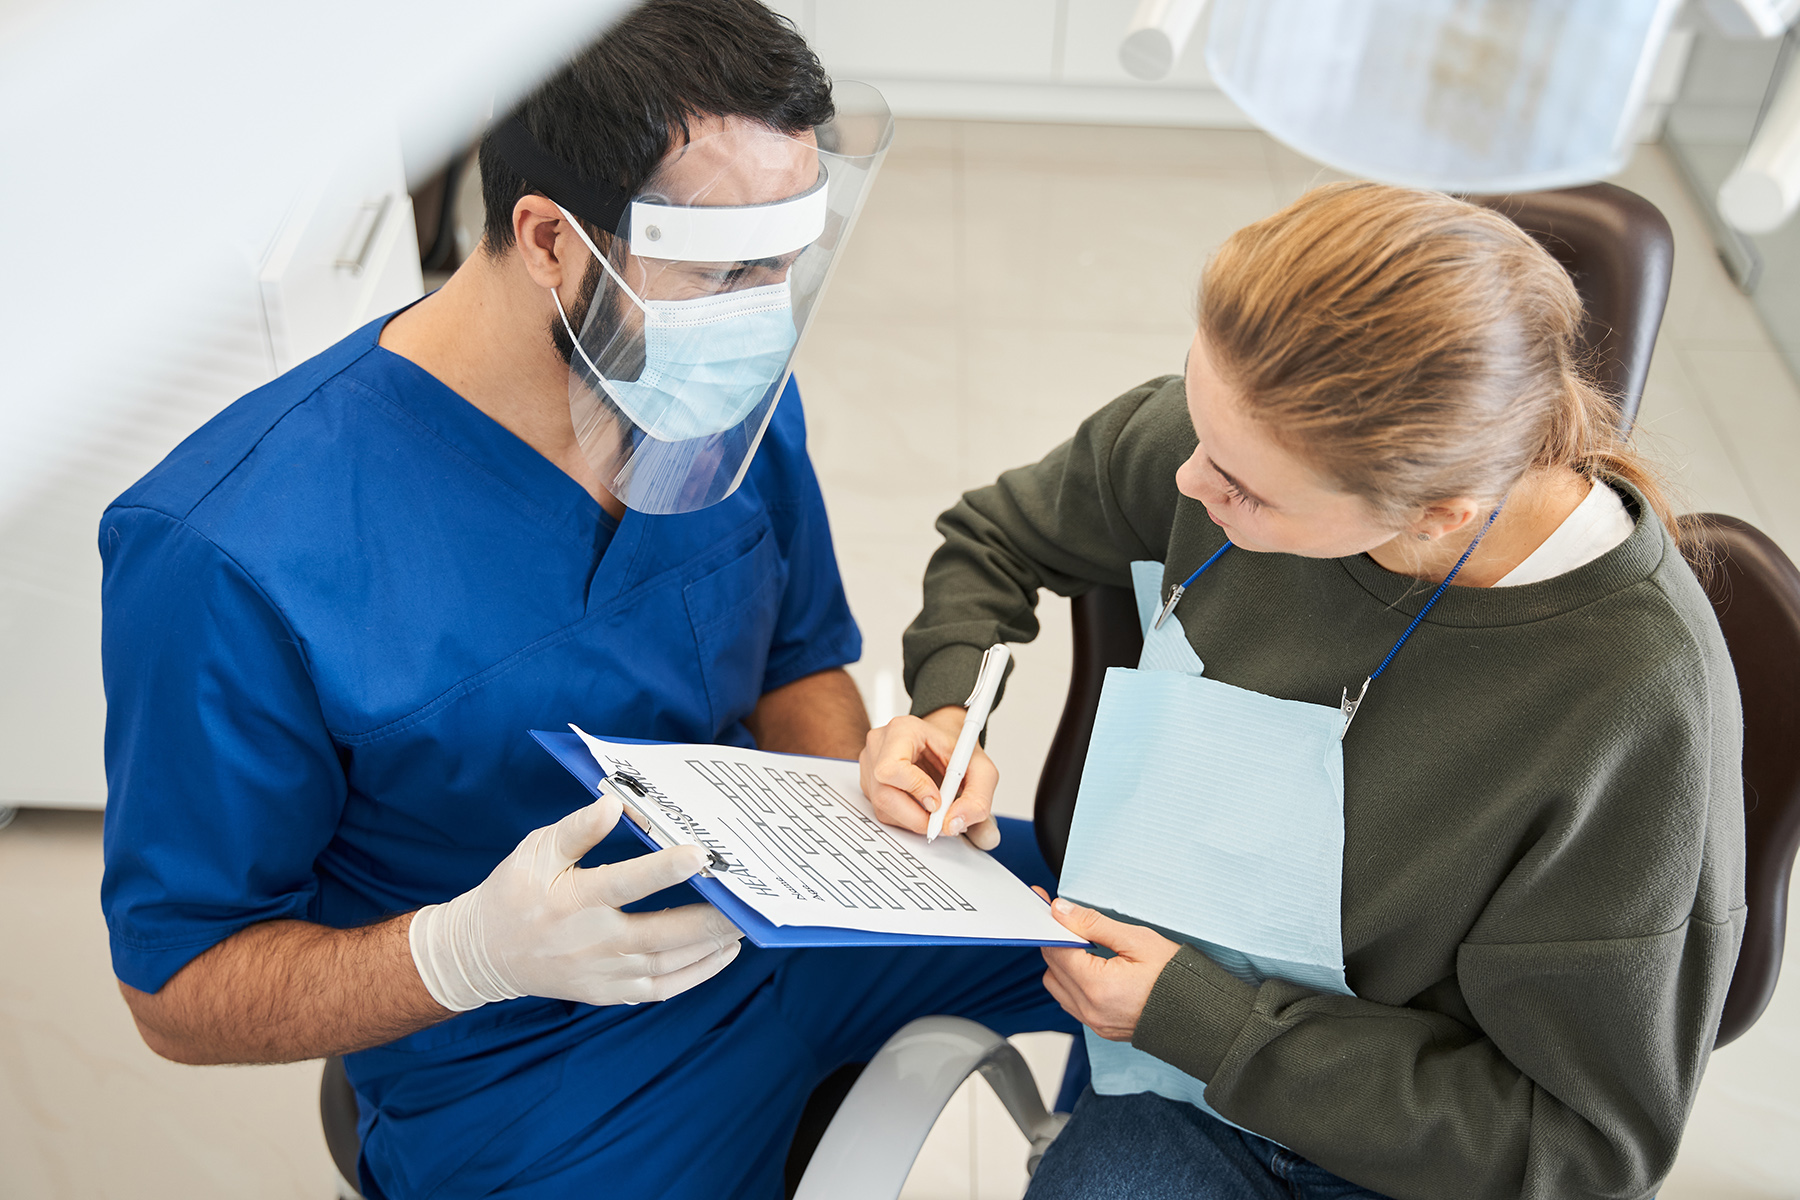 Dental assistant in Thailand holds a clipboard for patient to complete and sign. He wears a full mask and face shield and surgical gloves. She sits in the dentist chair.

